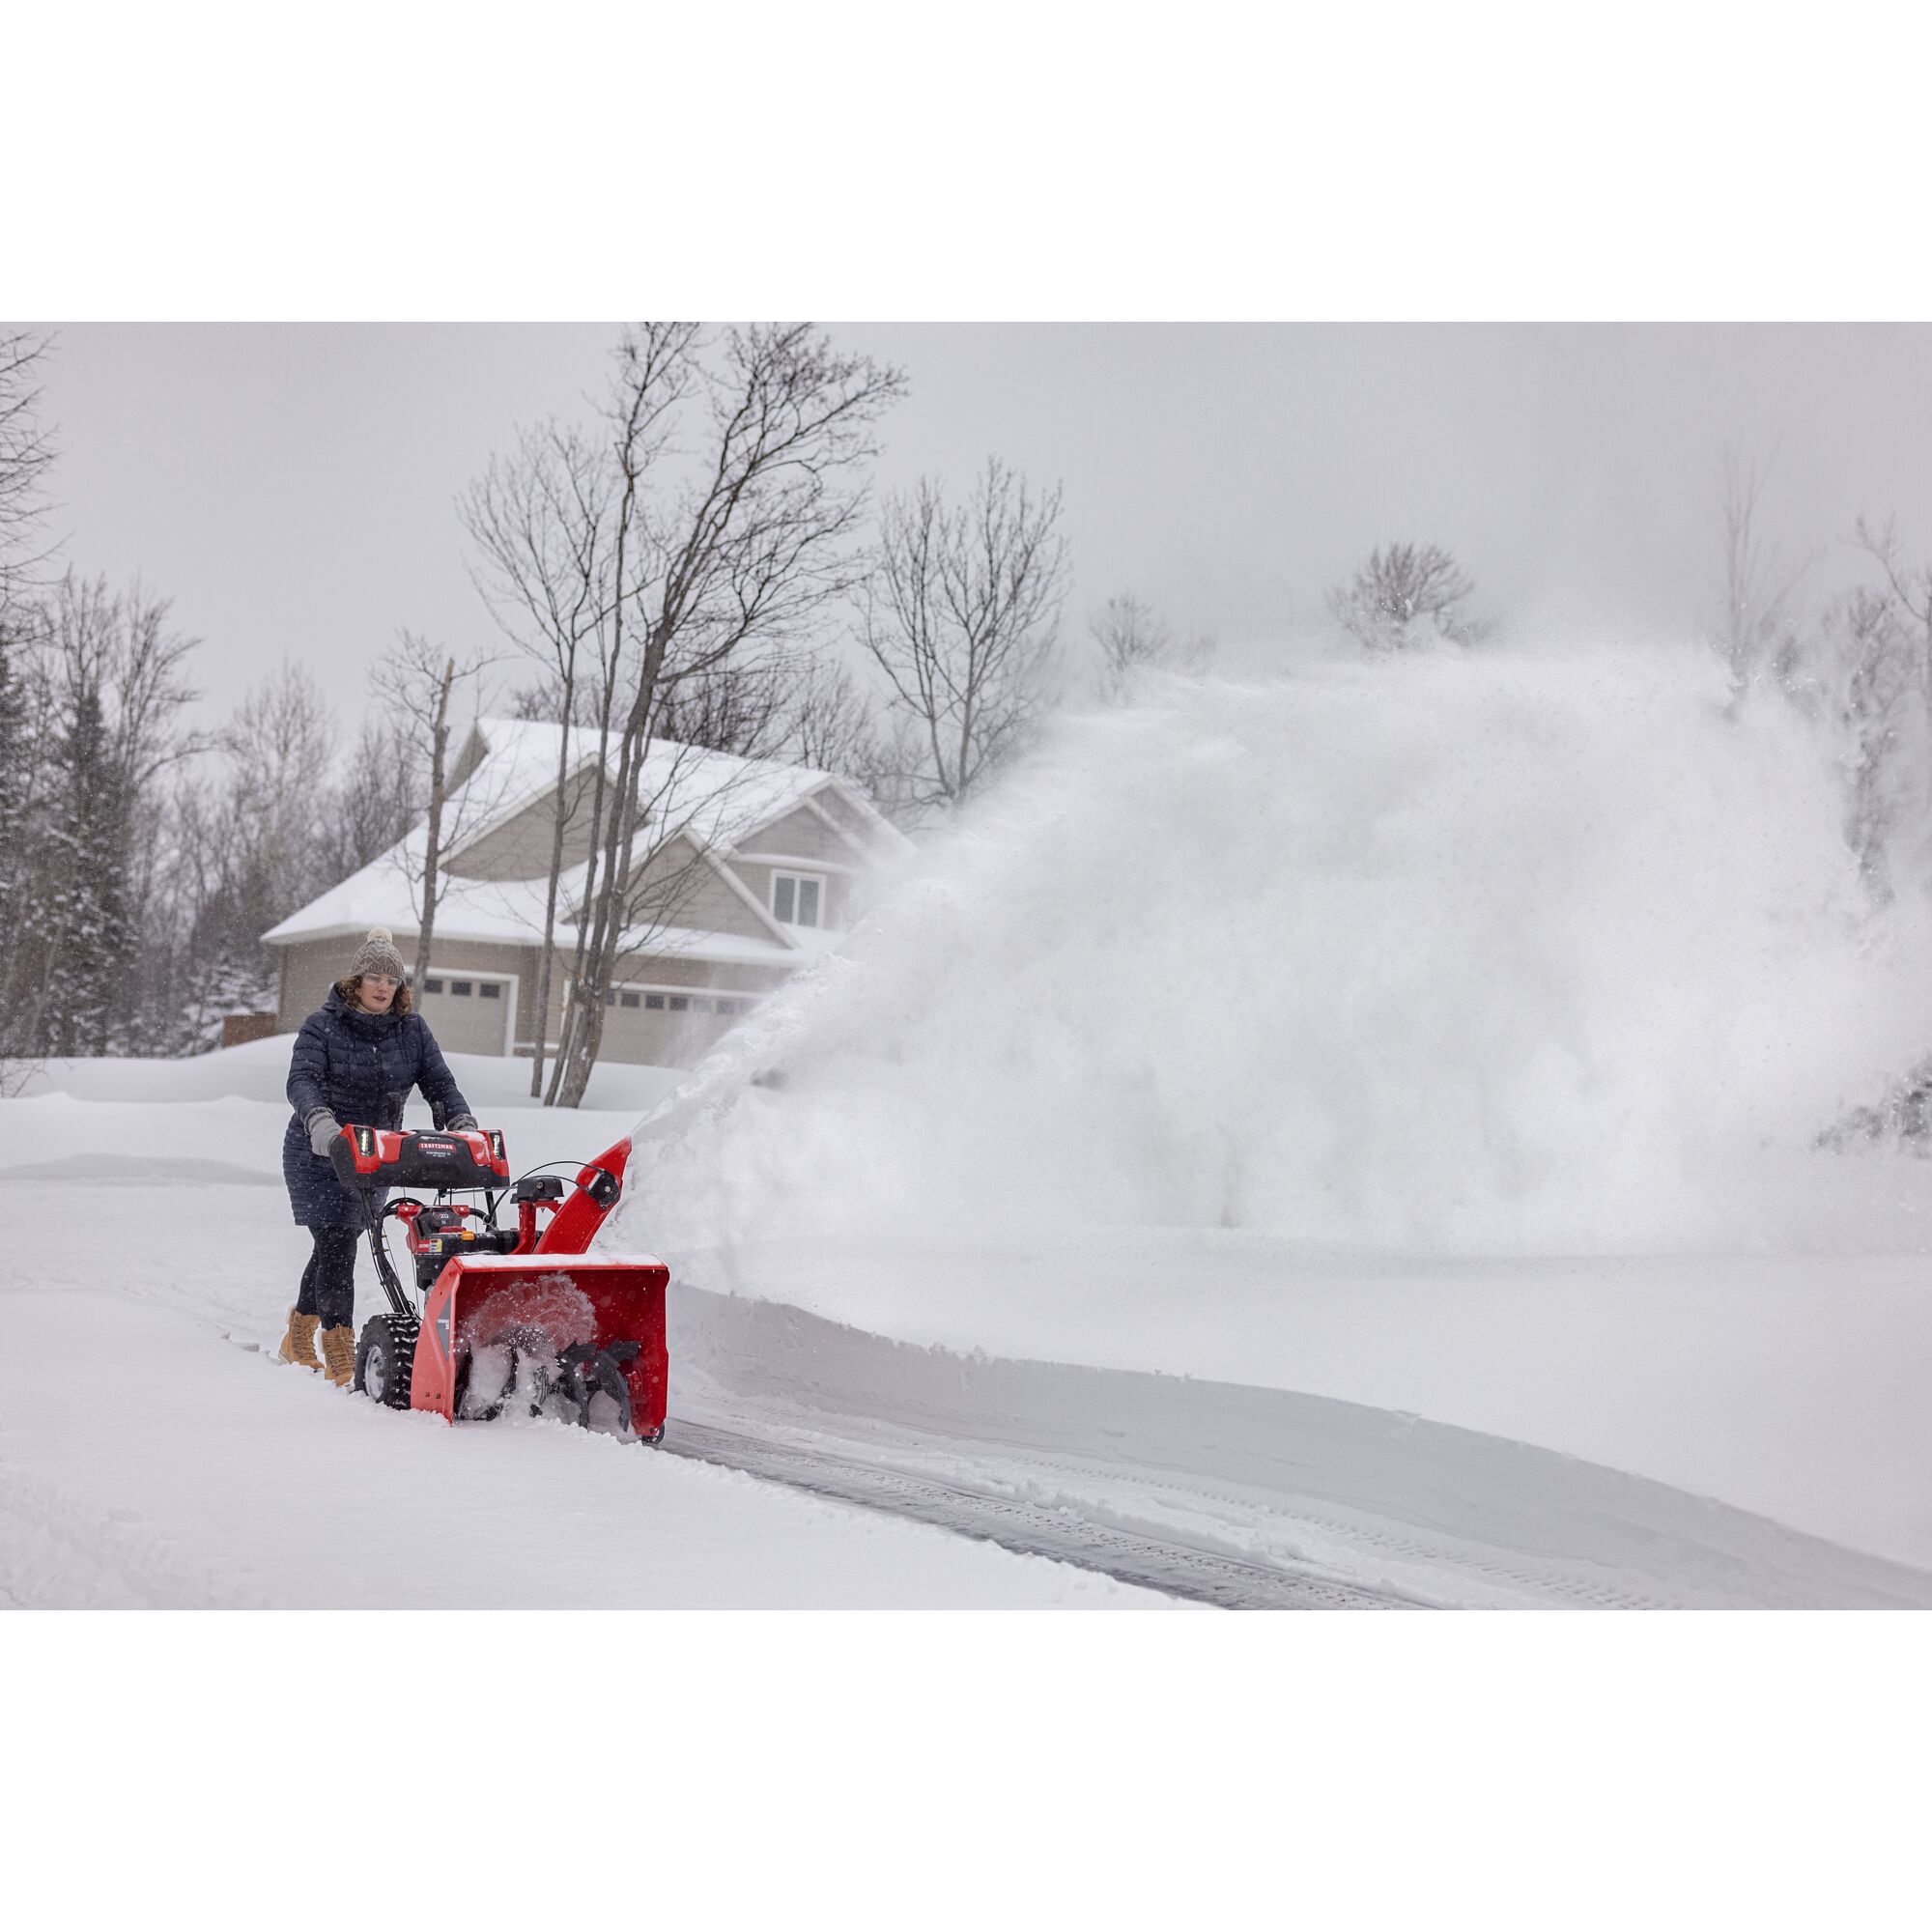 CRAFTSMAN Performance 26 V20 Start Snowblower clearing snow off driveway house in background